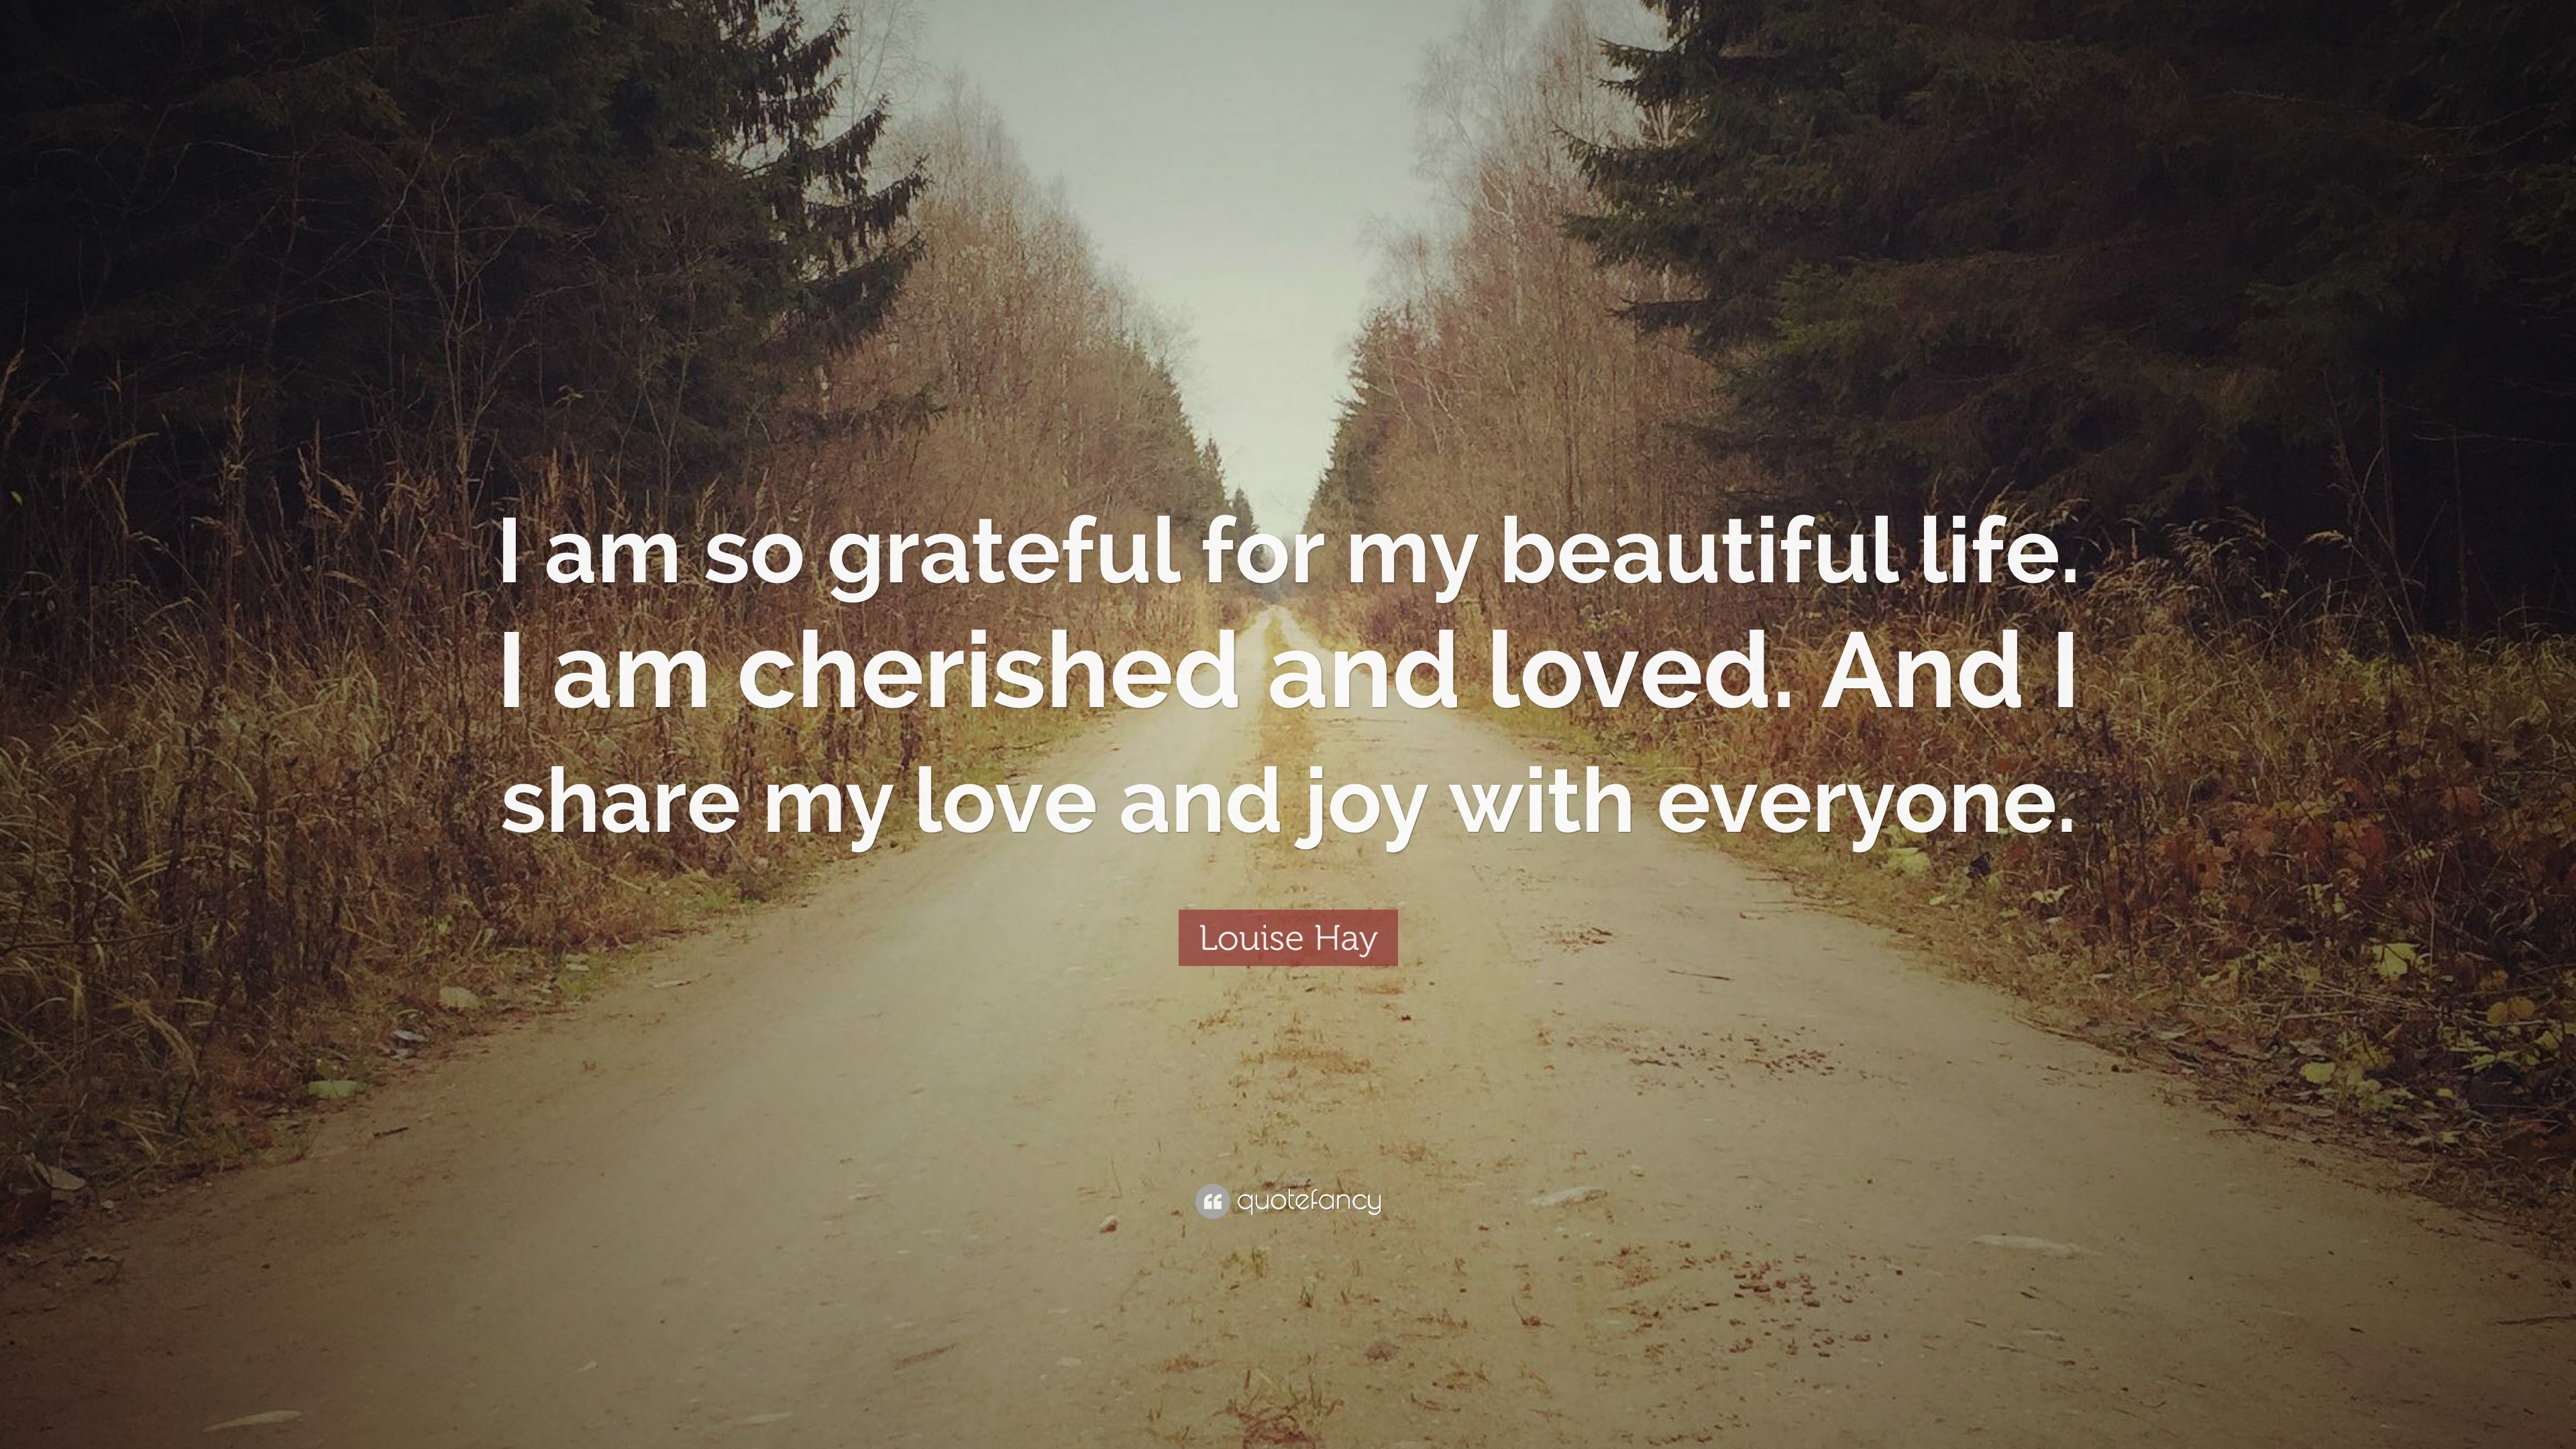 Louise Hay Quote I Am So Grateful For My Beautiful Life I Am Cherished And Loved And I Share